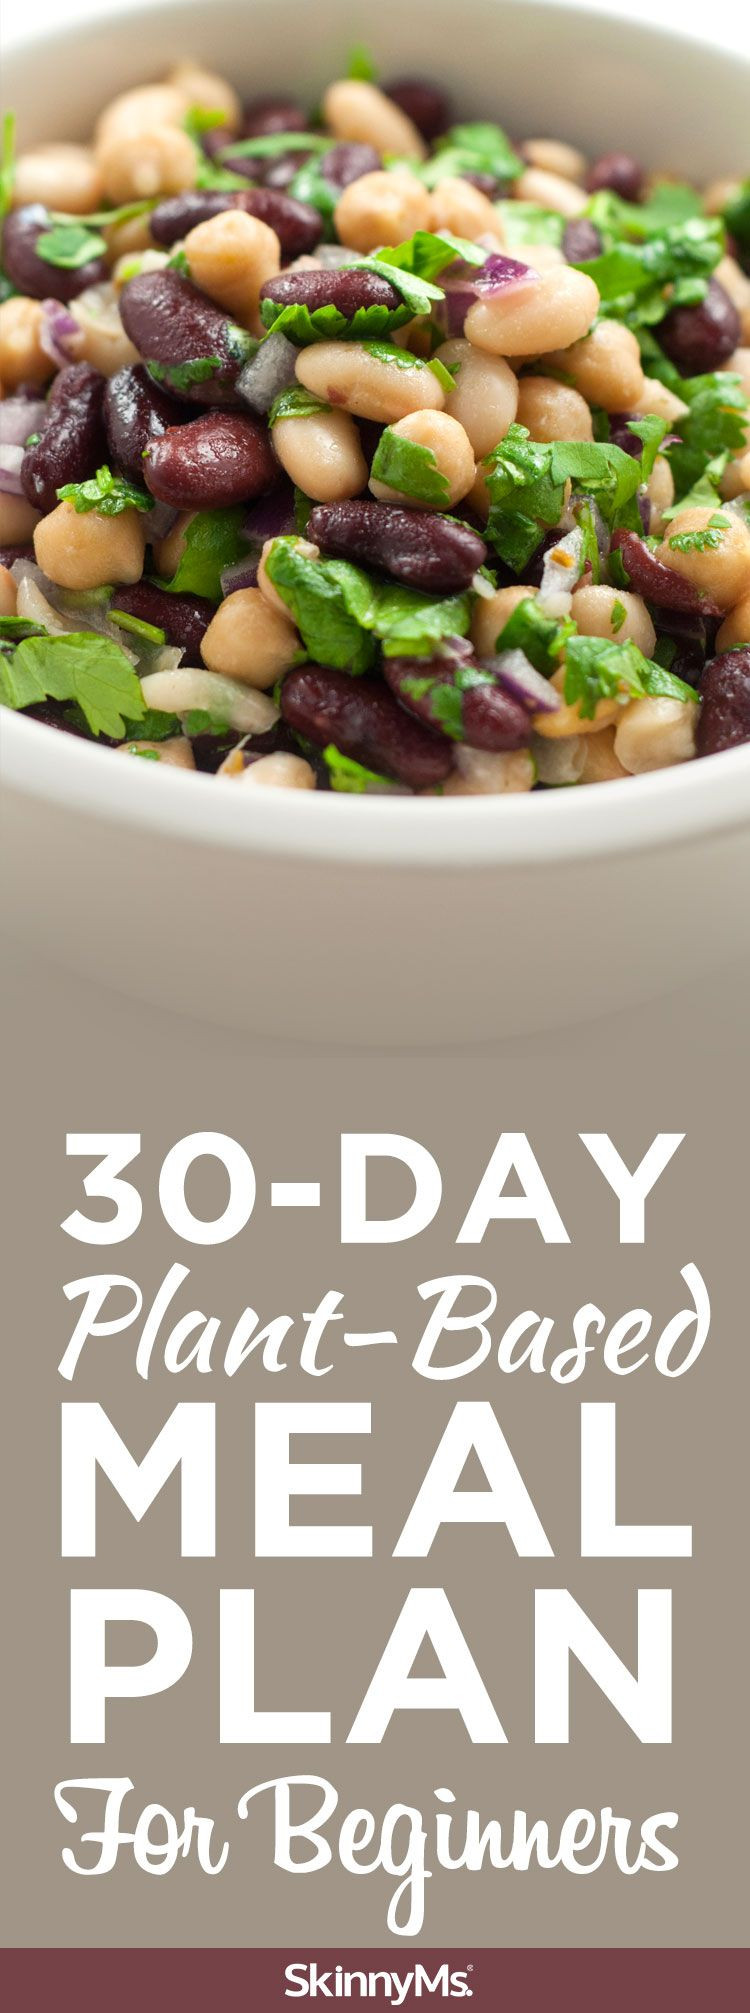 Plant Based Diet Recipes For Beginners
 30 Day Plant Based Meal Plan For Beginners